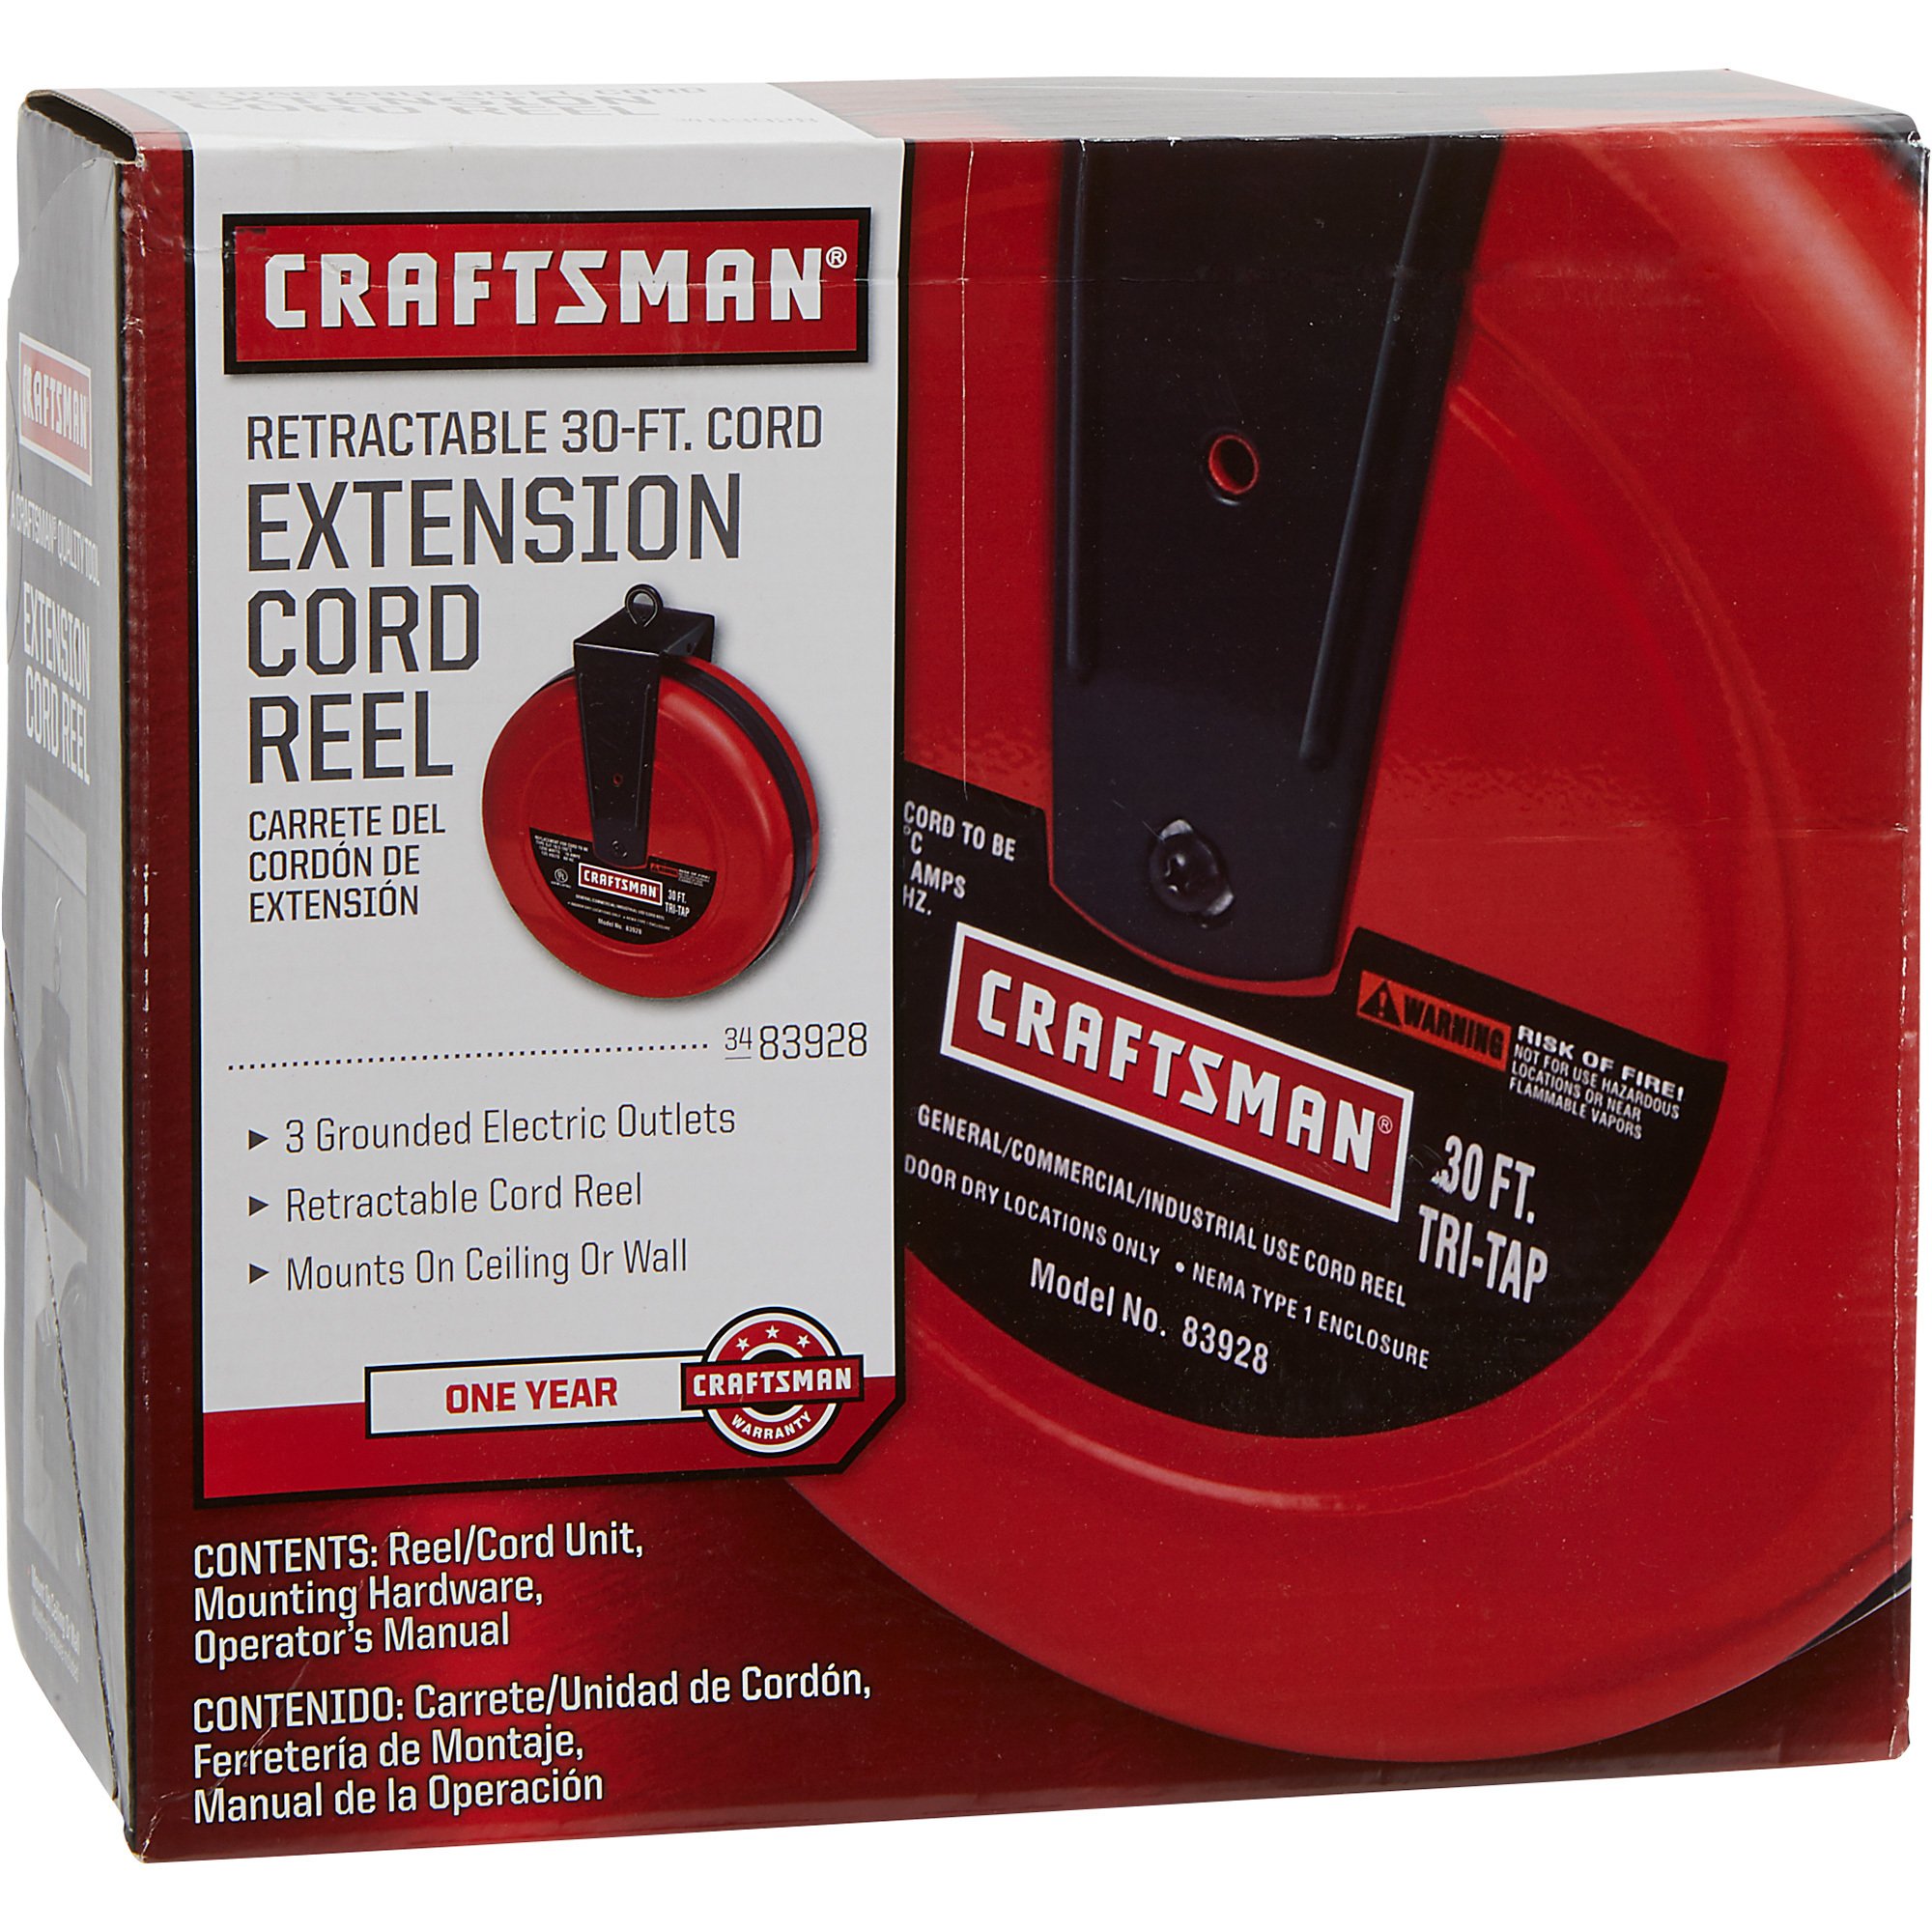 CRAFTSMAN Heavy Duty Retractable Extension Cord, 100 Ft with 4